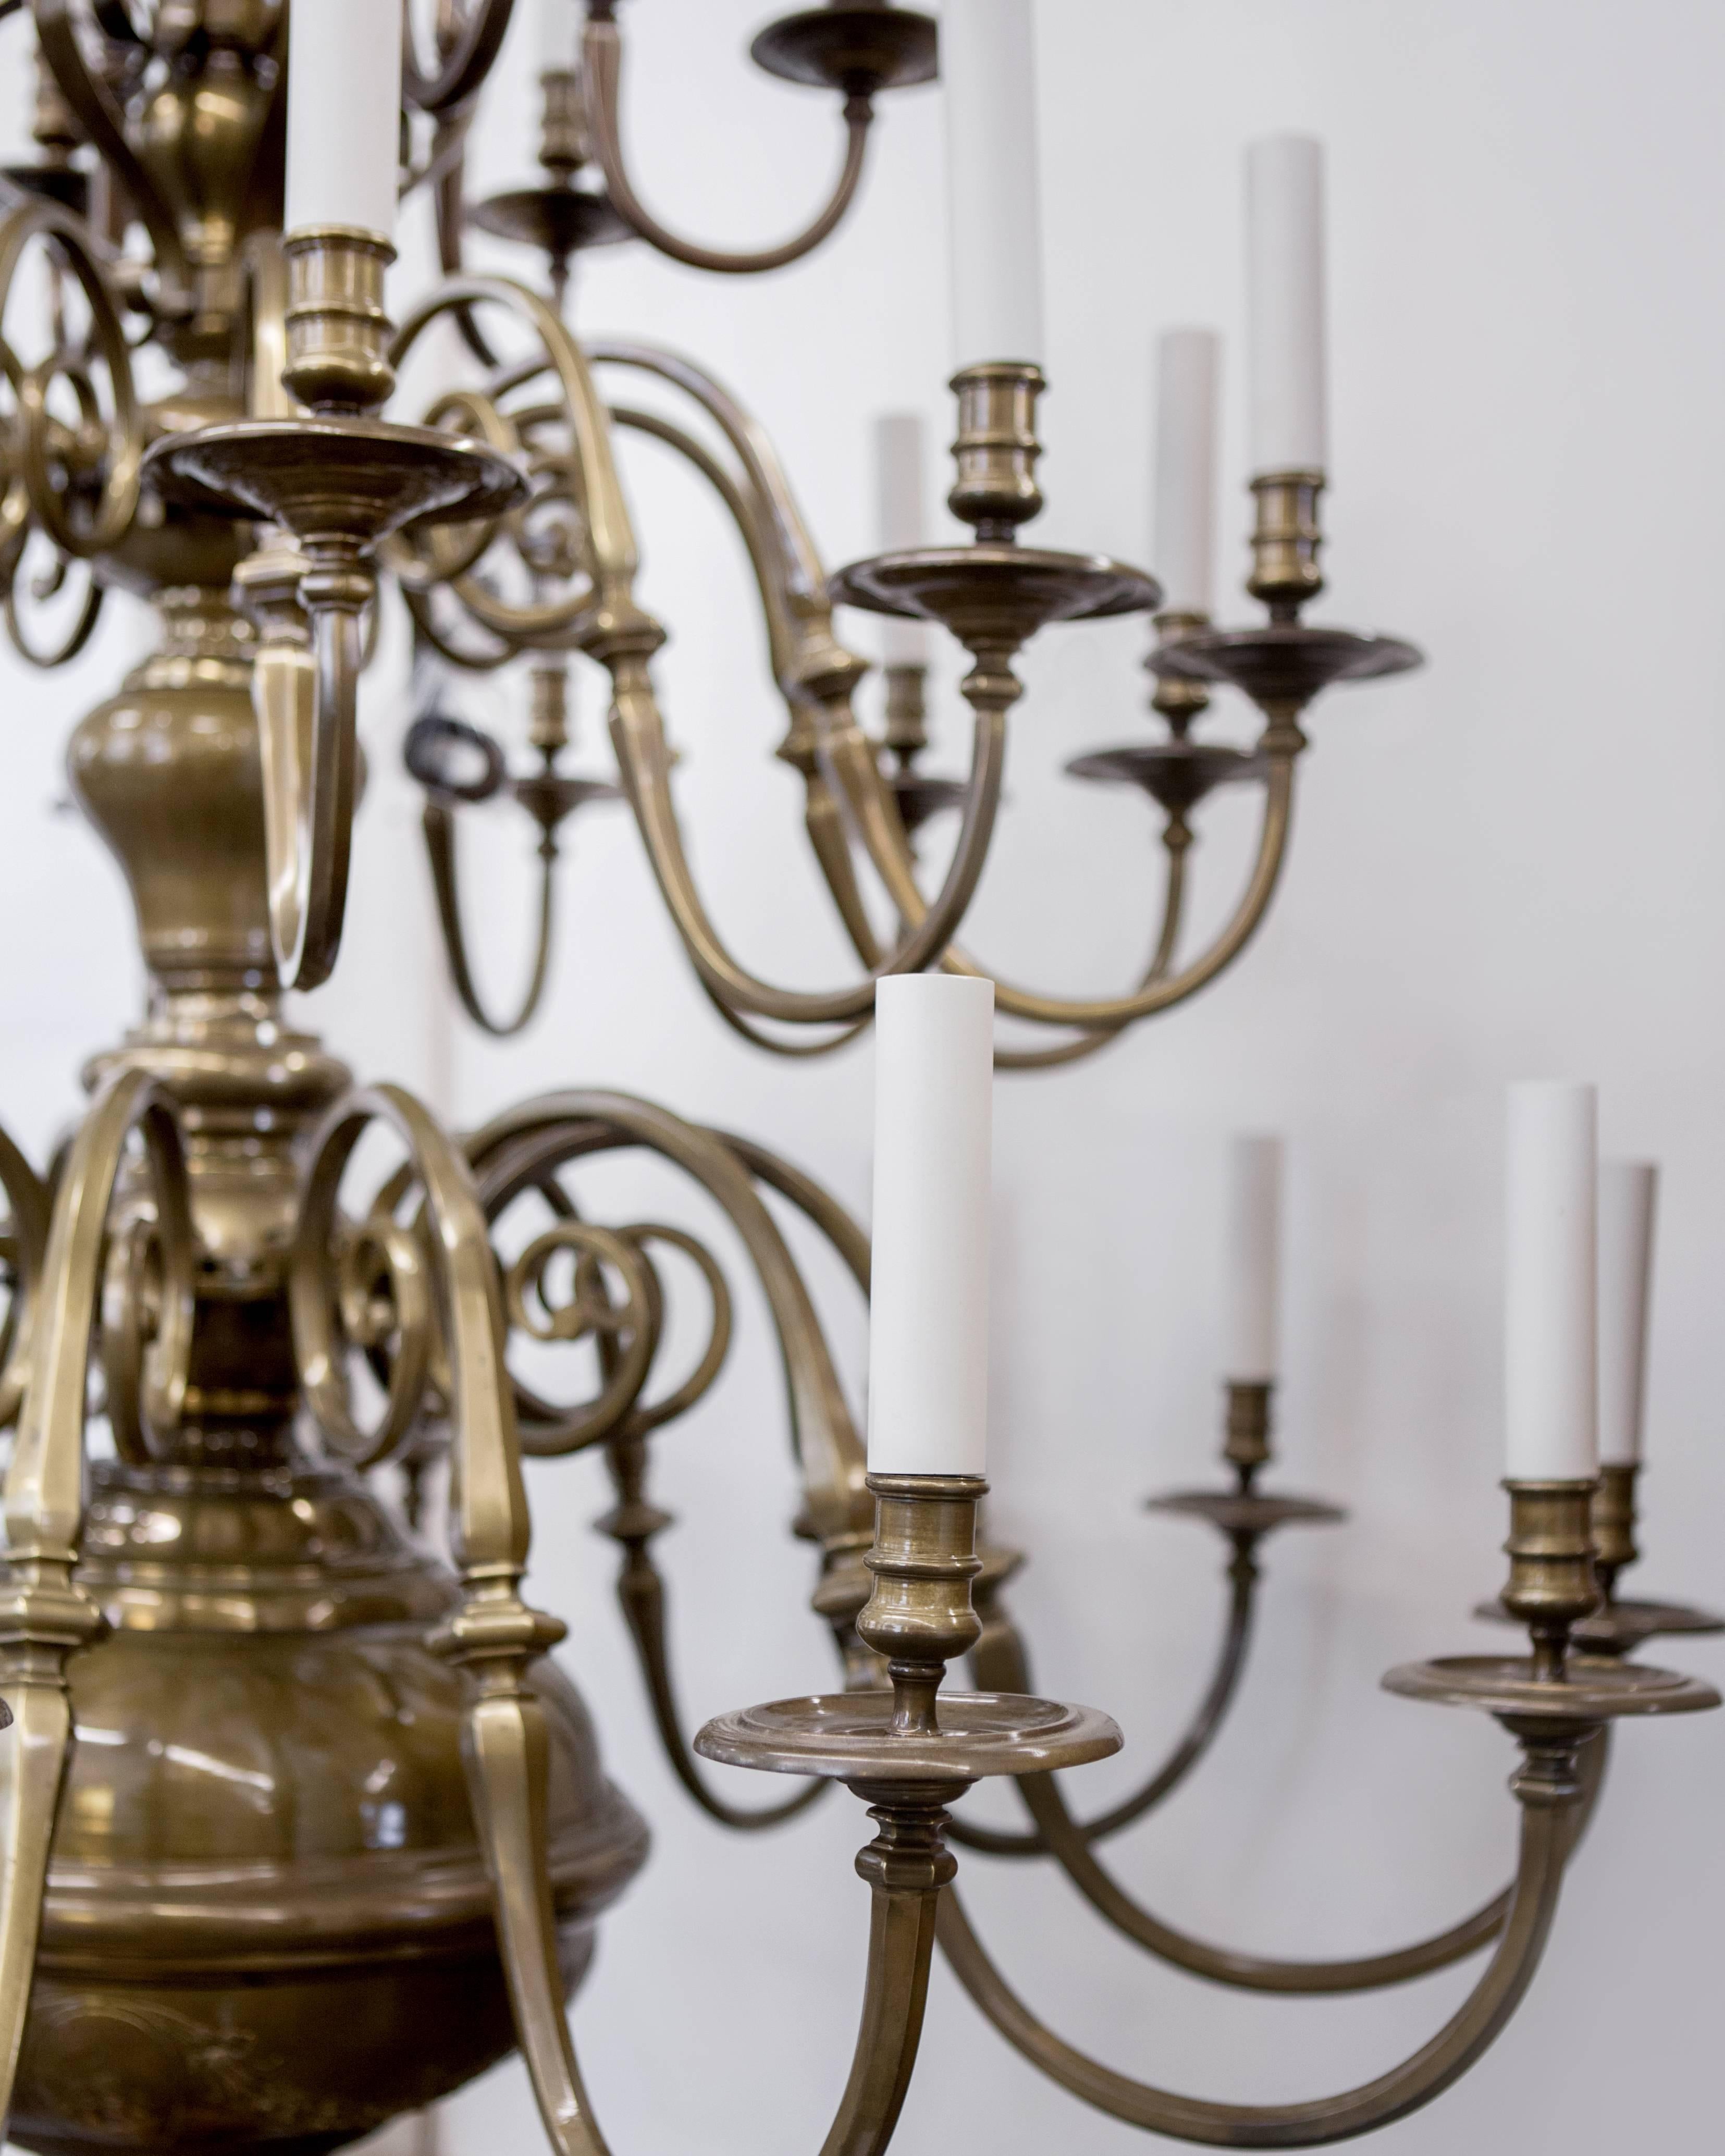 AHL3982

A large, three-tier, thirty-arm chandelier by the New York Maker E. F. Caldwell that once hung at Harvard University's Dental School Dining Hall. The large baluster-form body is detailed with repousse Harvard emblems. The S-profile arms